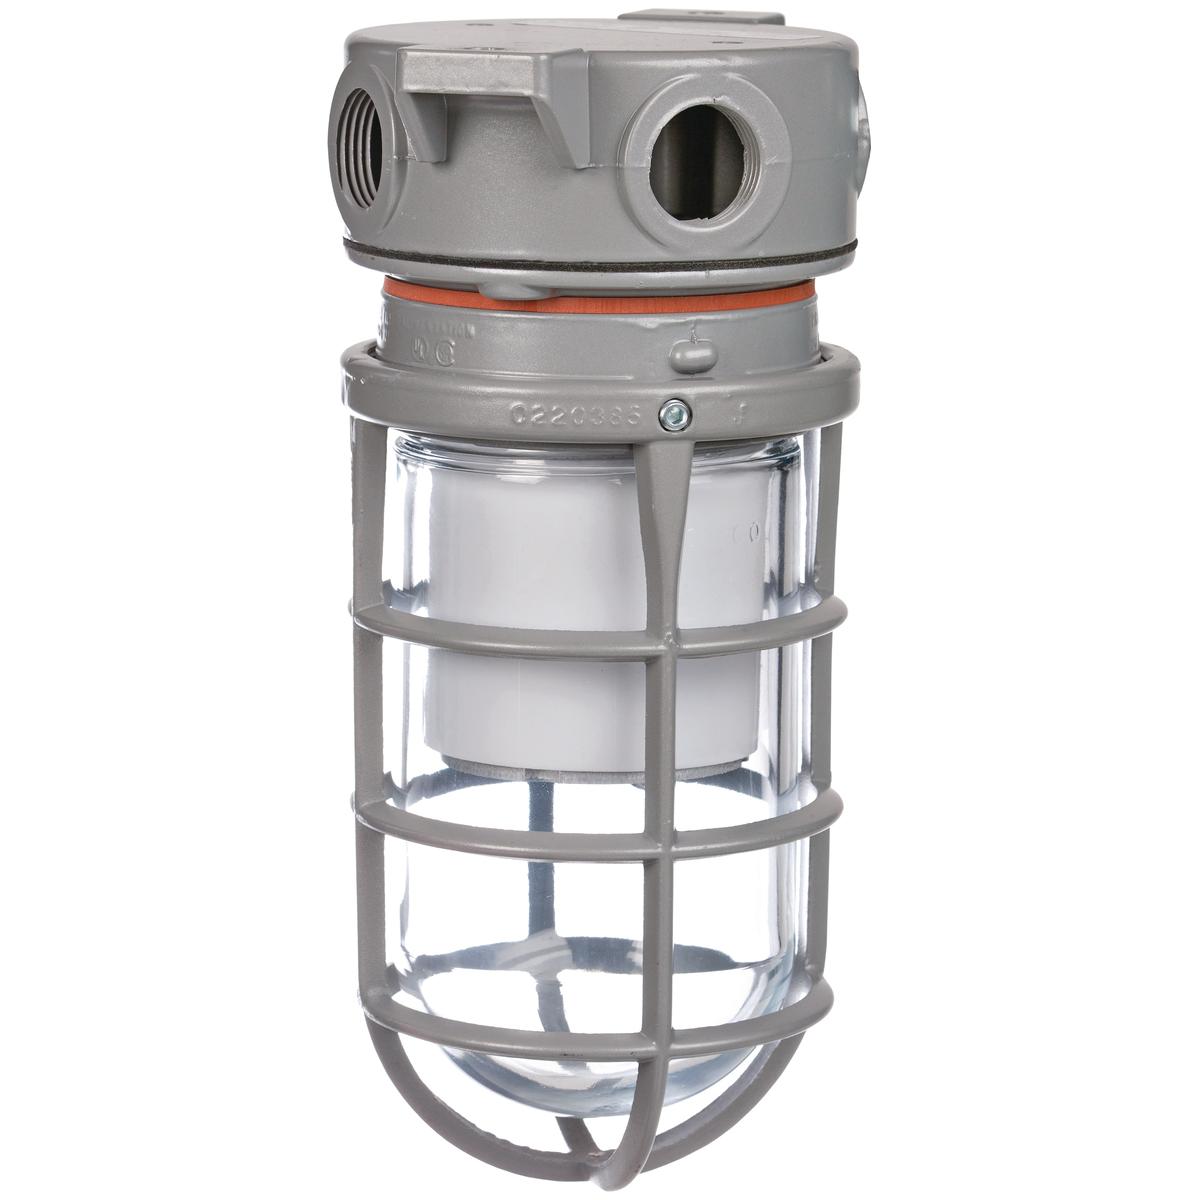 Hubbell VSL1330F2HG The VSL Series is a Vapor Tight/ Utility fixture using energy efficient LED's. This fixture is made with a cast copper-free aluminum housing and mount that is  suitable for harsh and hazardous environments. With the design of this fixtures internal heat s